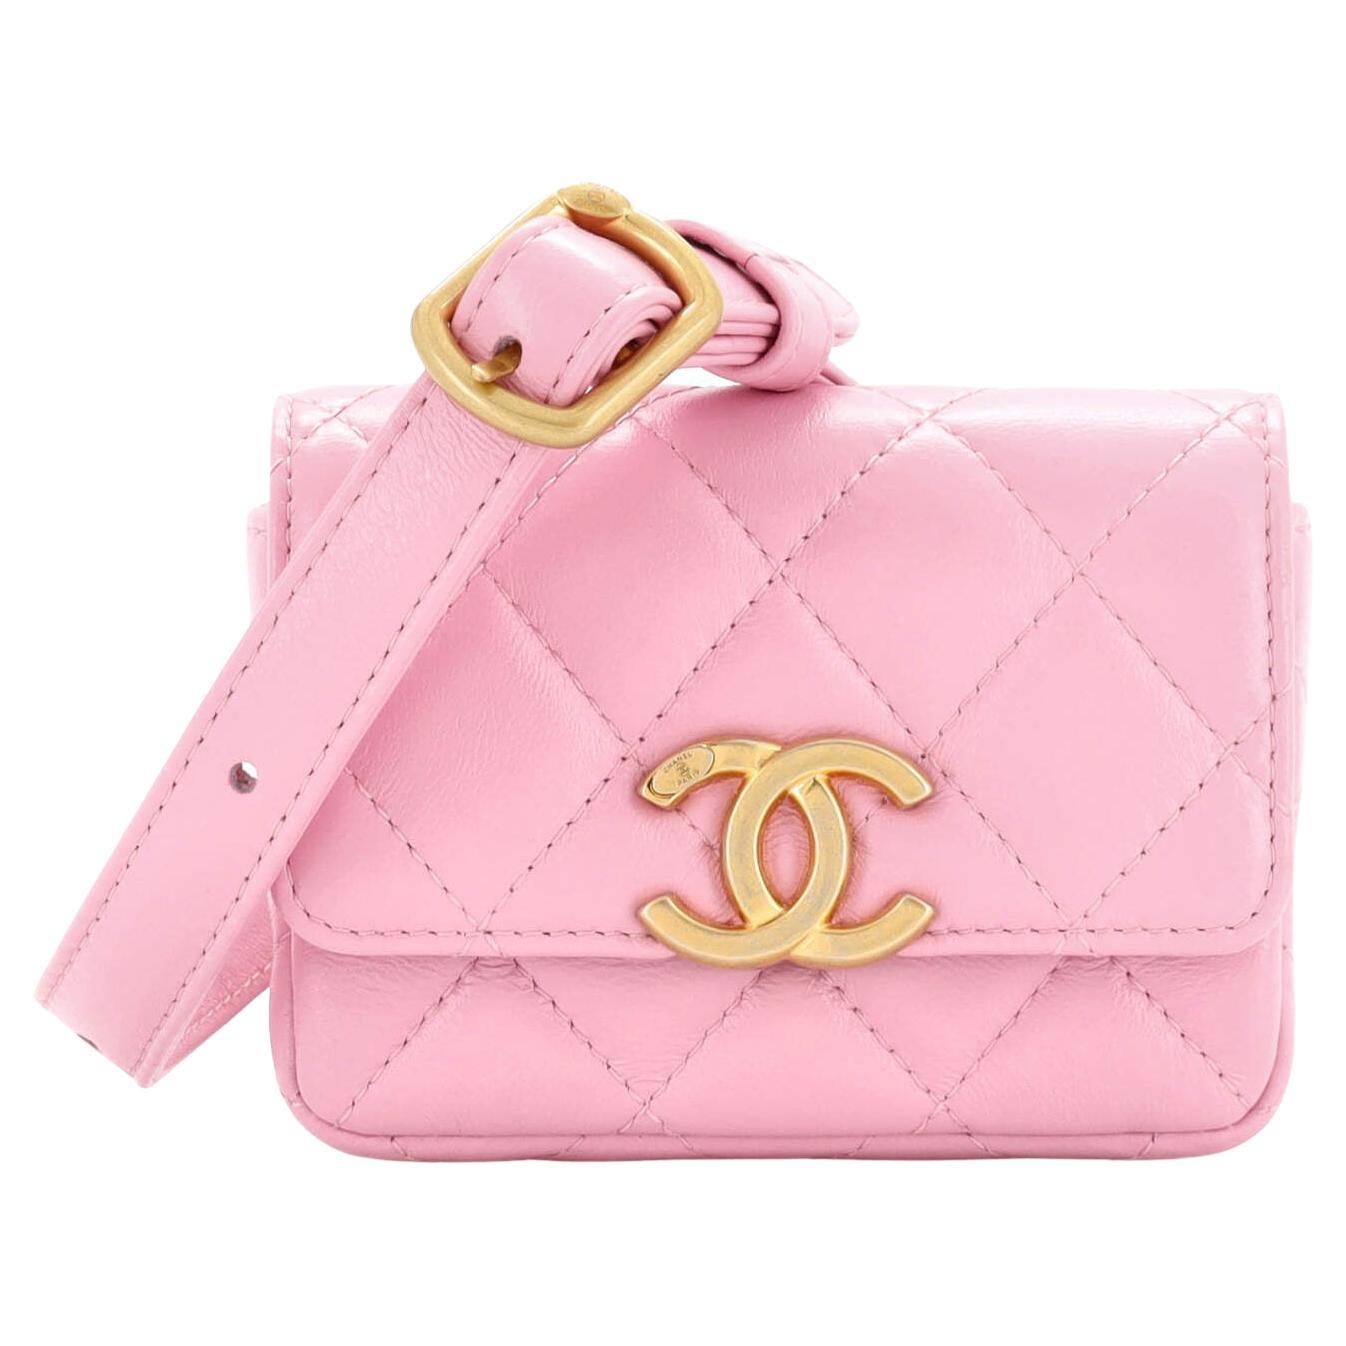 Chanel Small Flap Bag - 630 For Sale on 1stDibs  chanel small flap bag  price, chanel classic flap small, small flap bag chanel